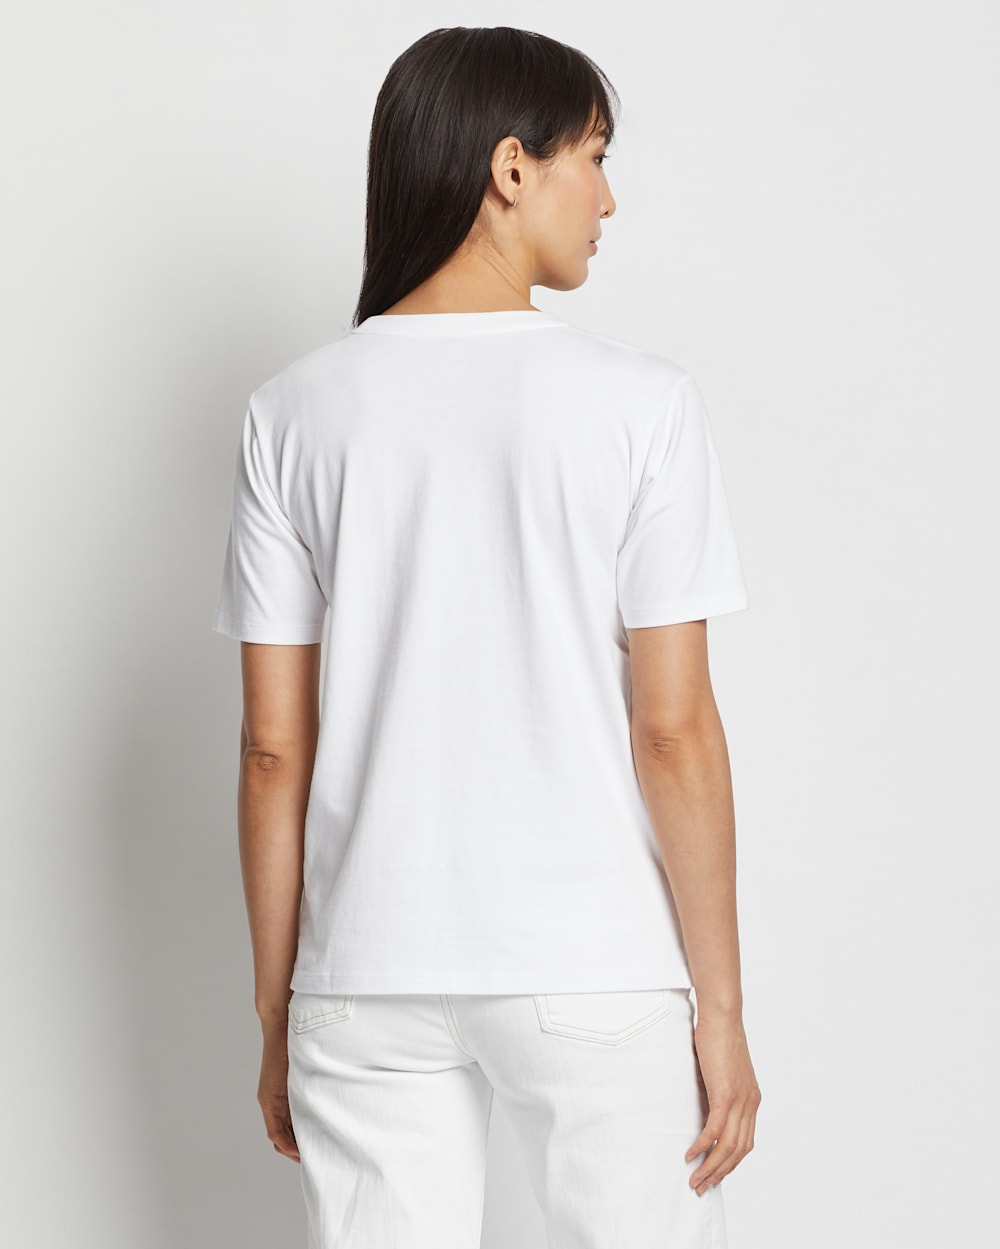 ALTERNATE VIEW OF WOMEN'S DESCHUTES EMBROIDERED TEE IN WHITE image number 3